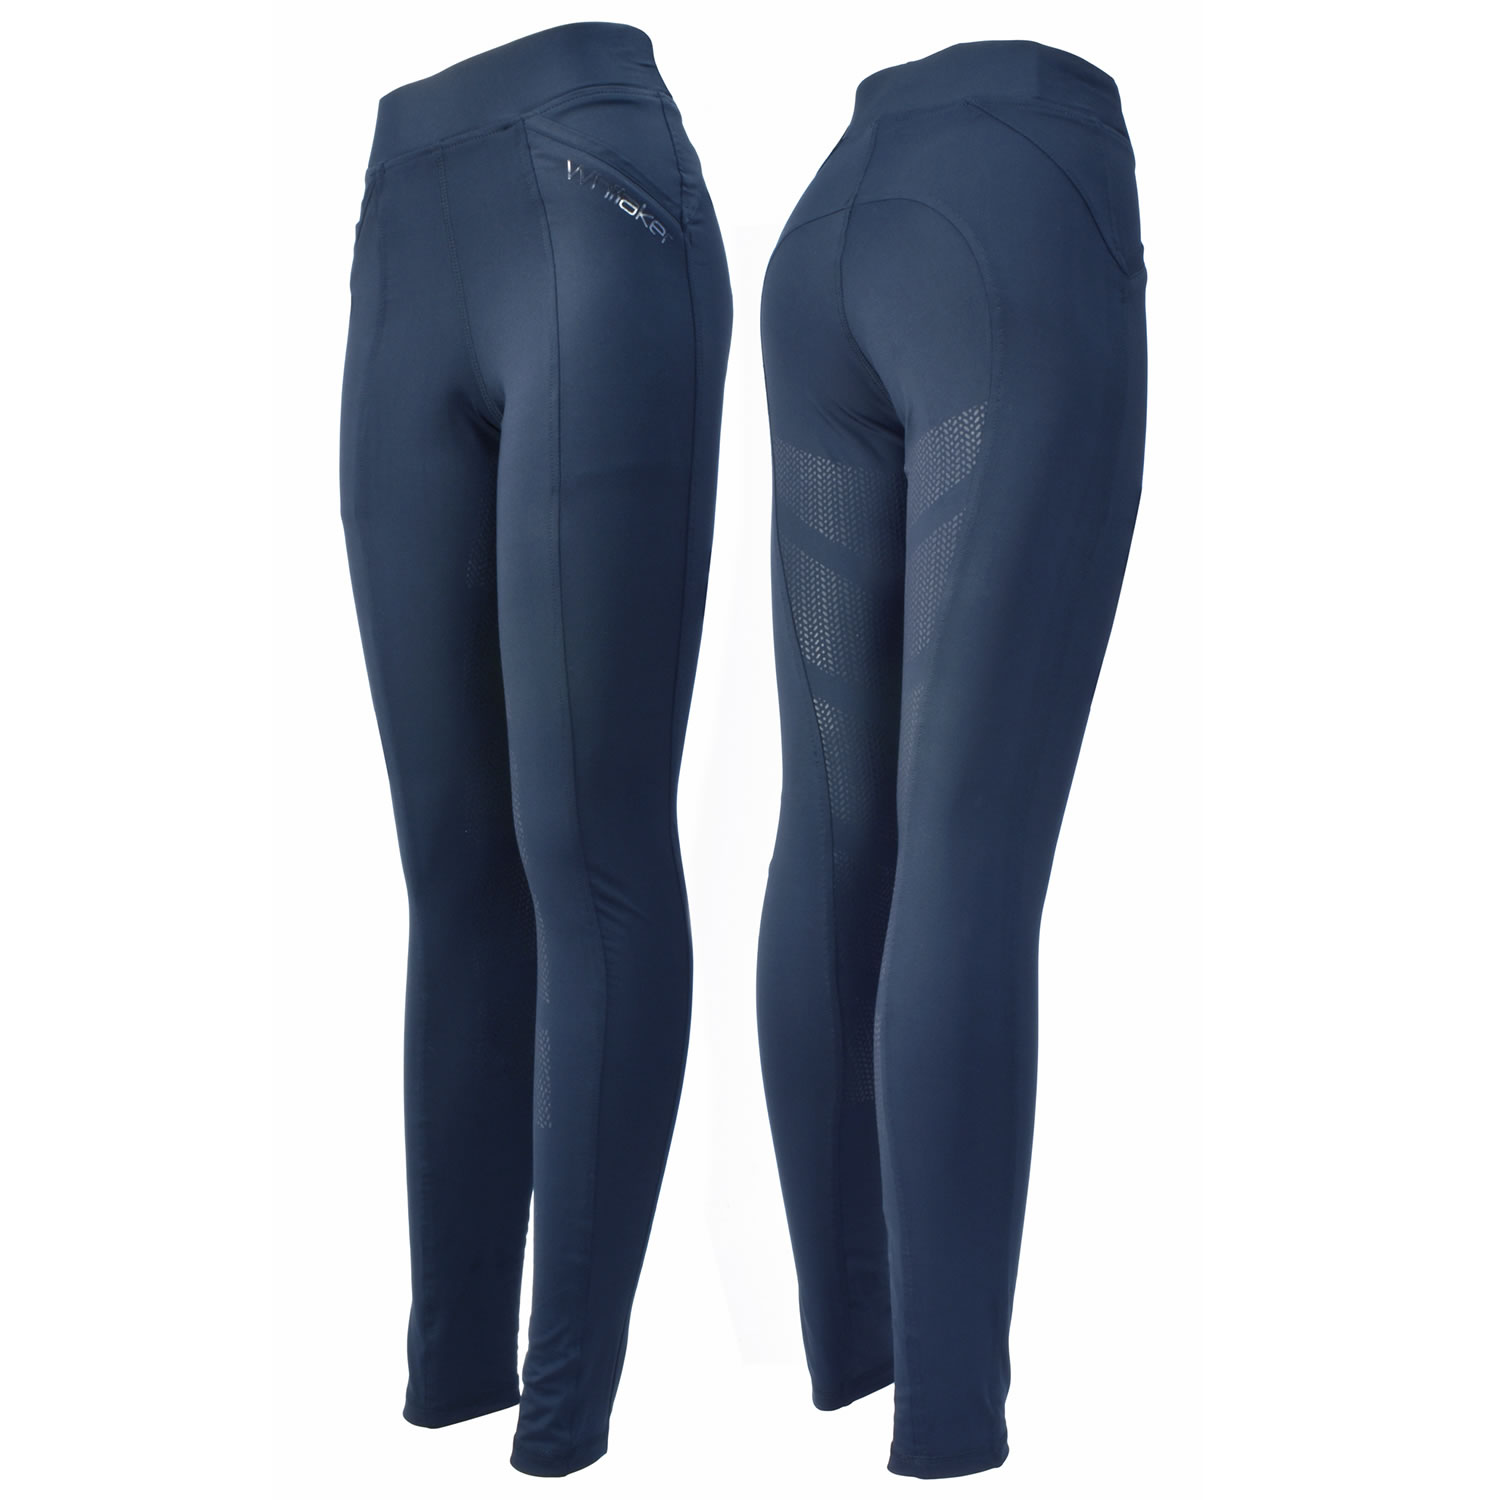 WHITAKER SCHOLES RIDING TIGHTS NAVY  SMALL LADIES